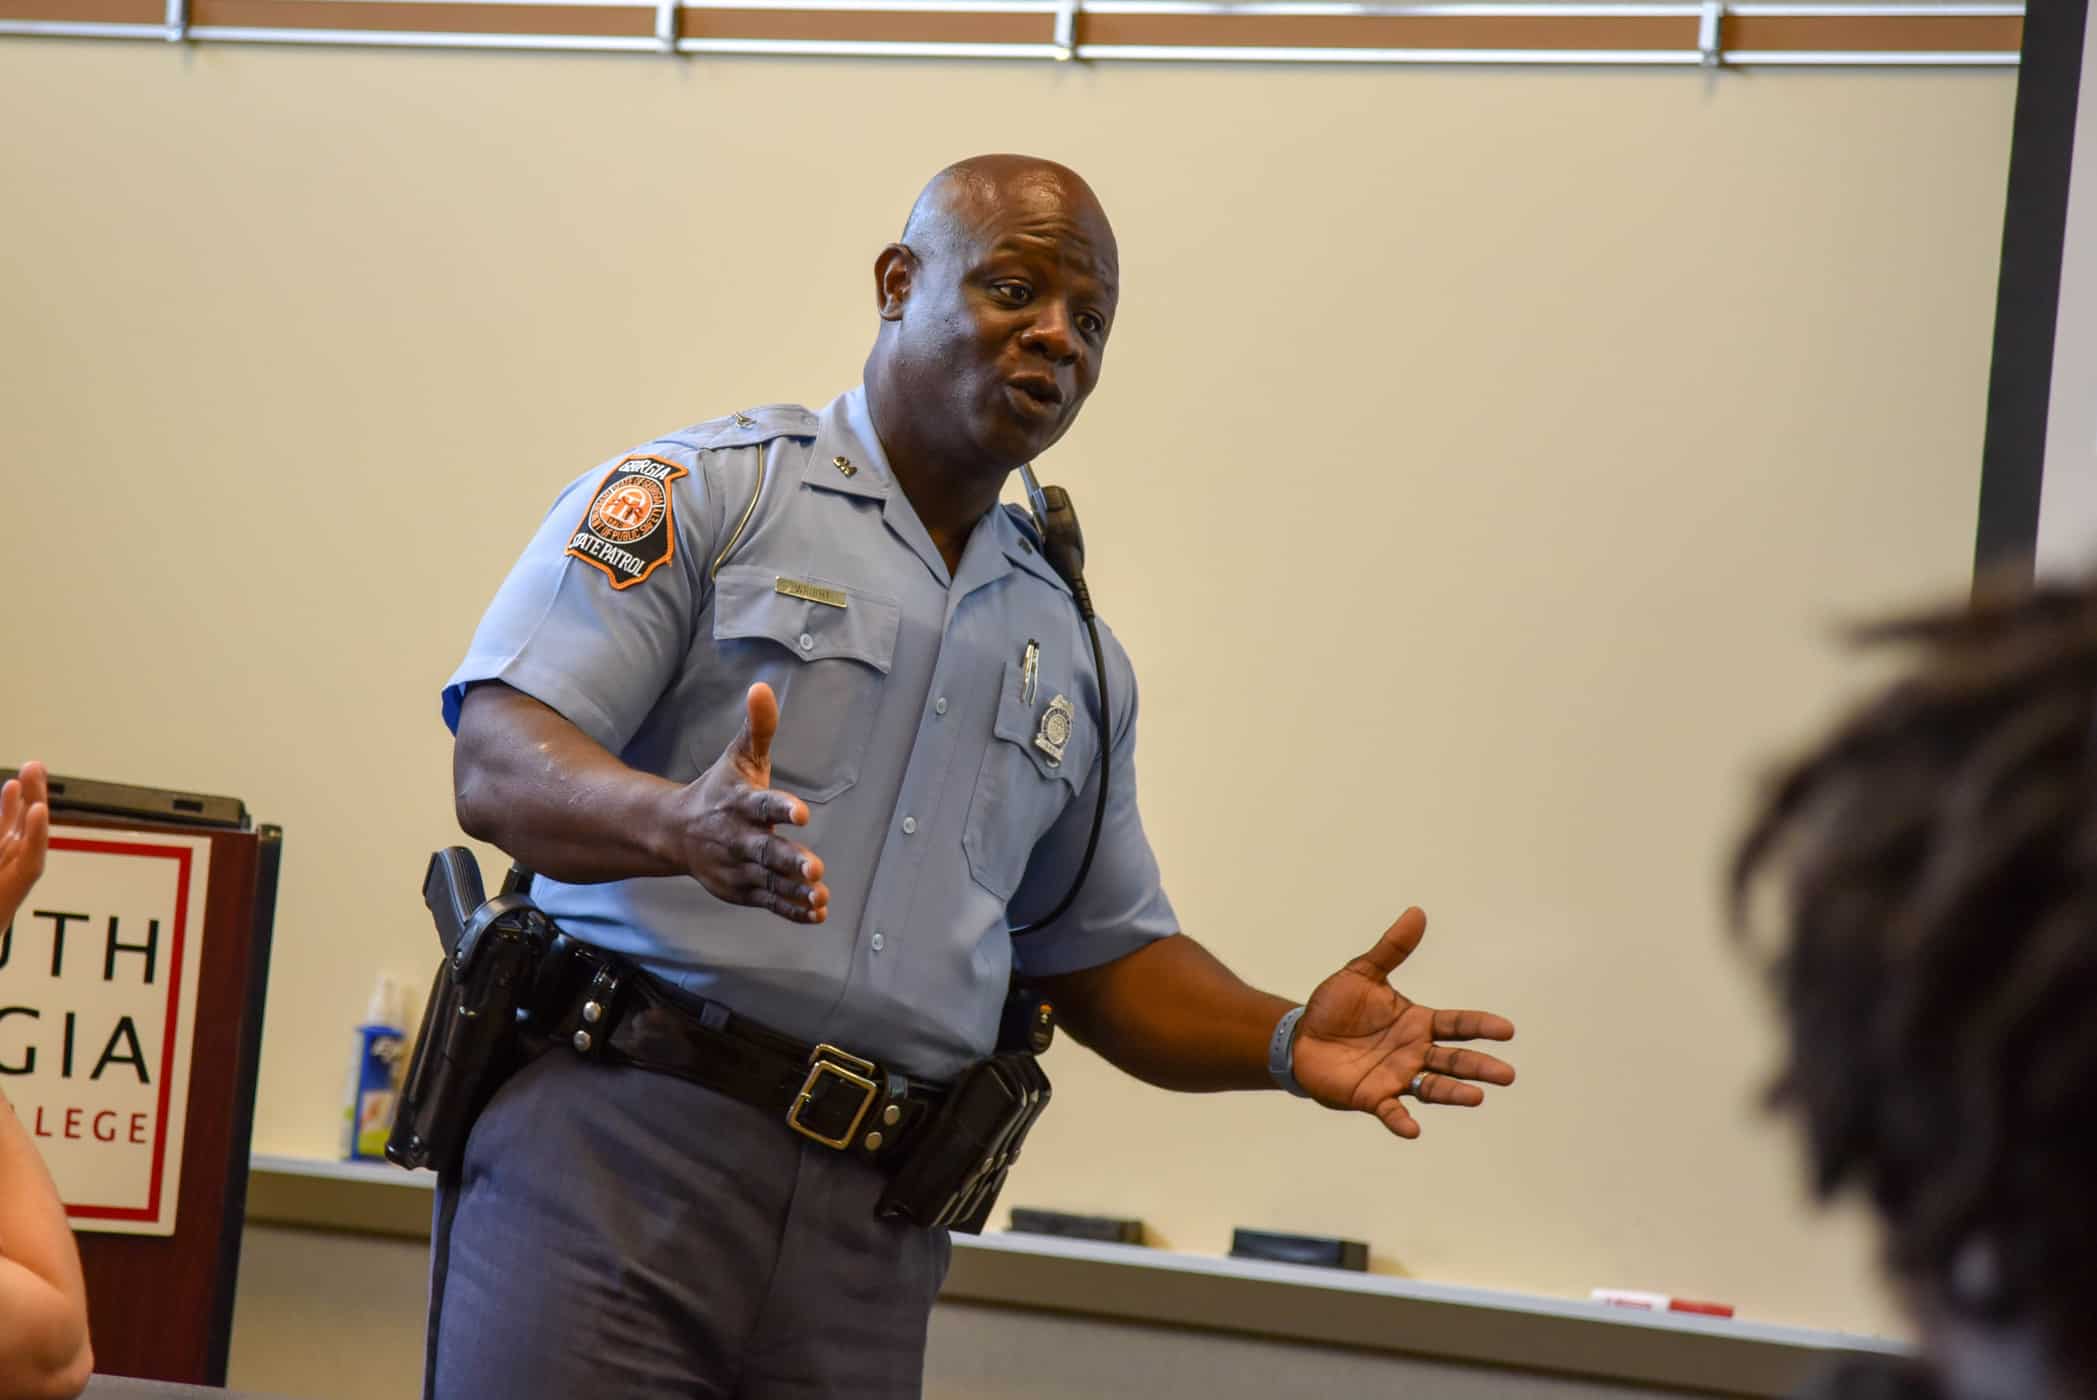 A Georgia State Patrol trooper talks in front of a classroom